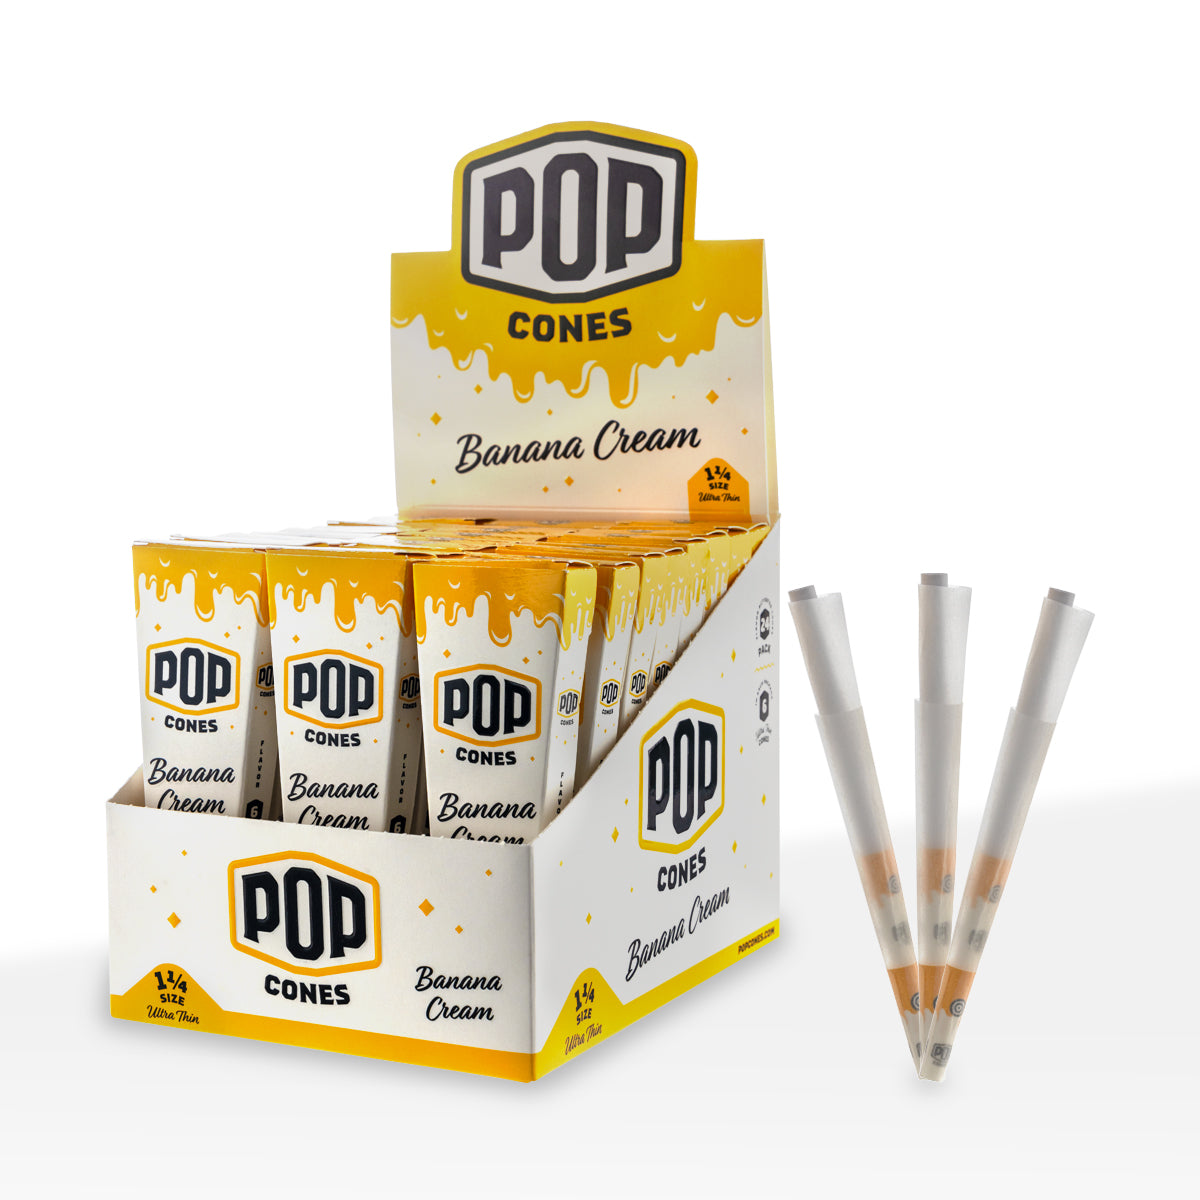 Pop Cones | Ultra Thin Pre-Rolled Cones 1¼ Size | 78mm - Various Flavors - 6 Pack 24 Count Pre-Rolled Cones Biohazard Inc Banana Cream  